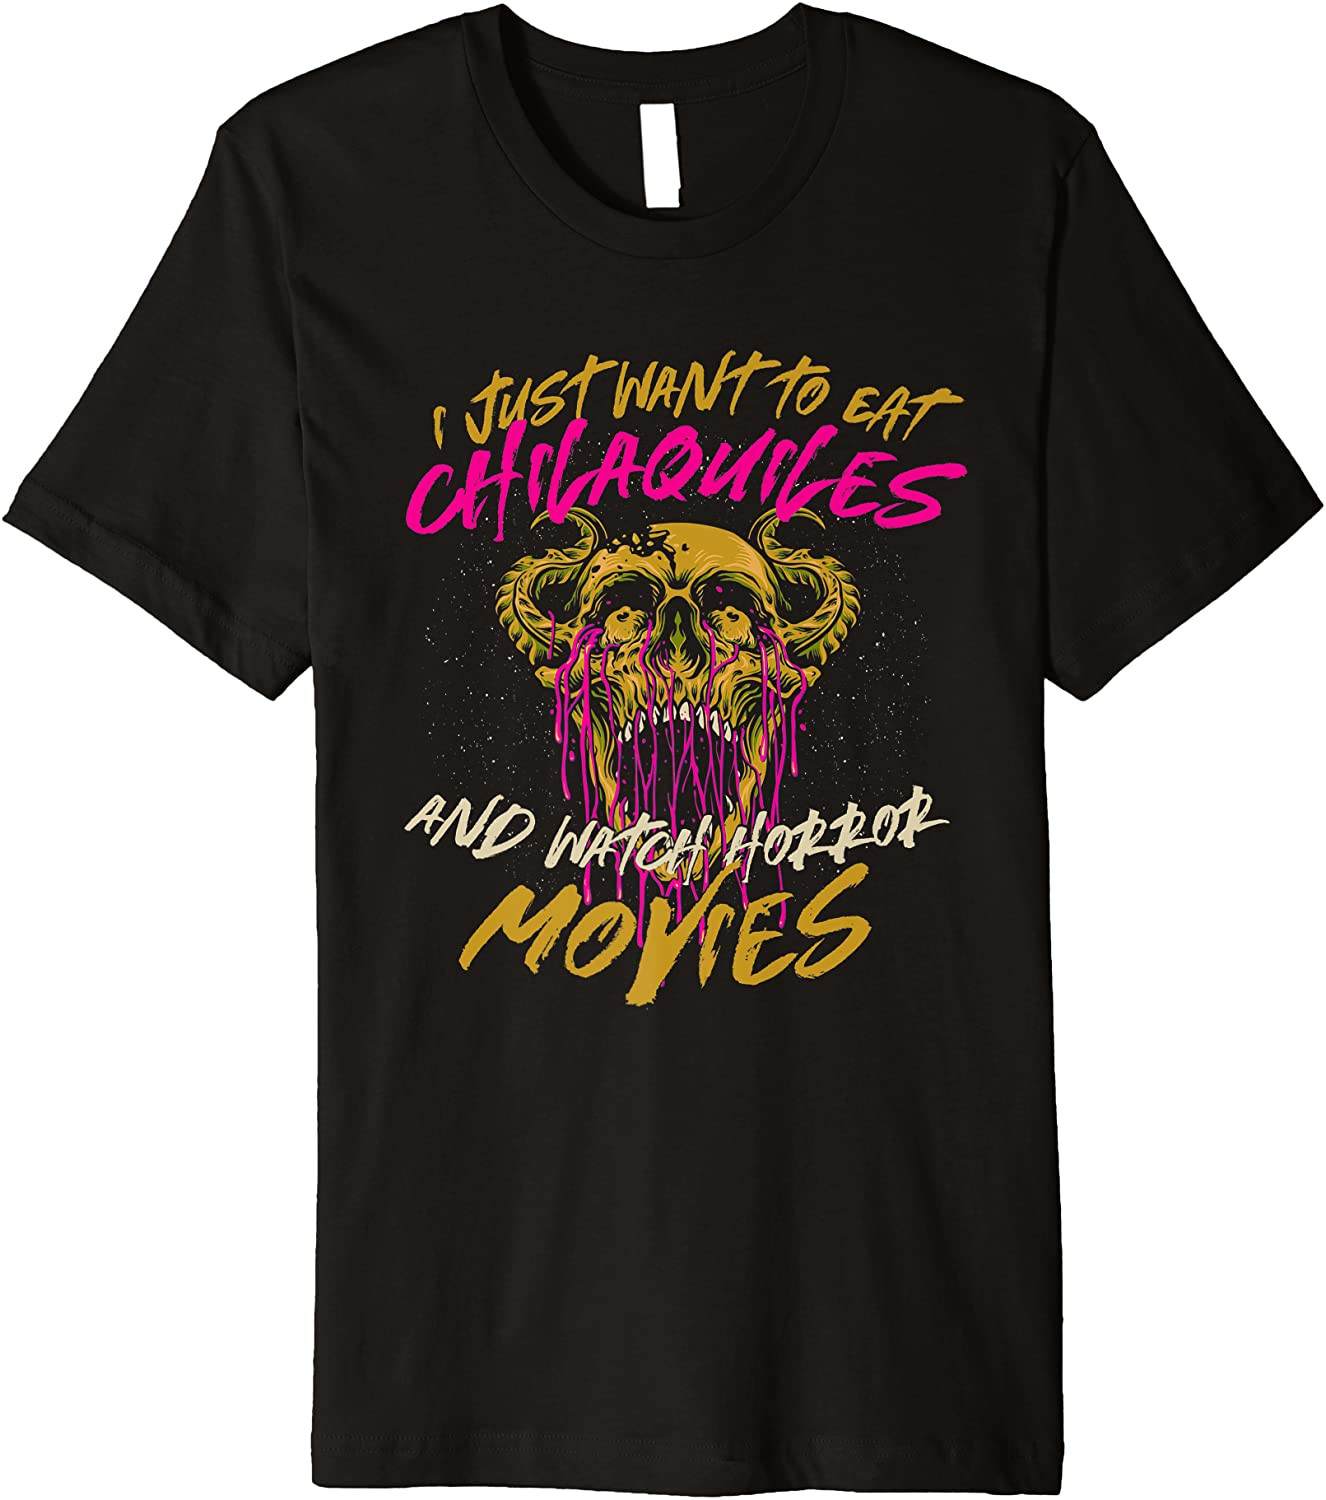 Eat Chilaquiles And Watch Horror Movies Comfort Food T-Shirt